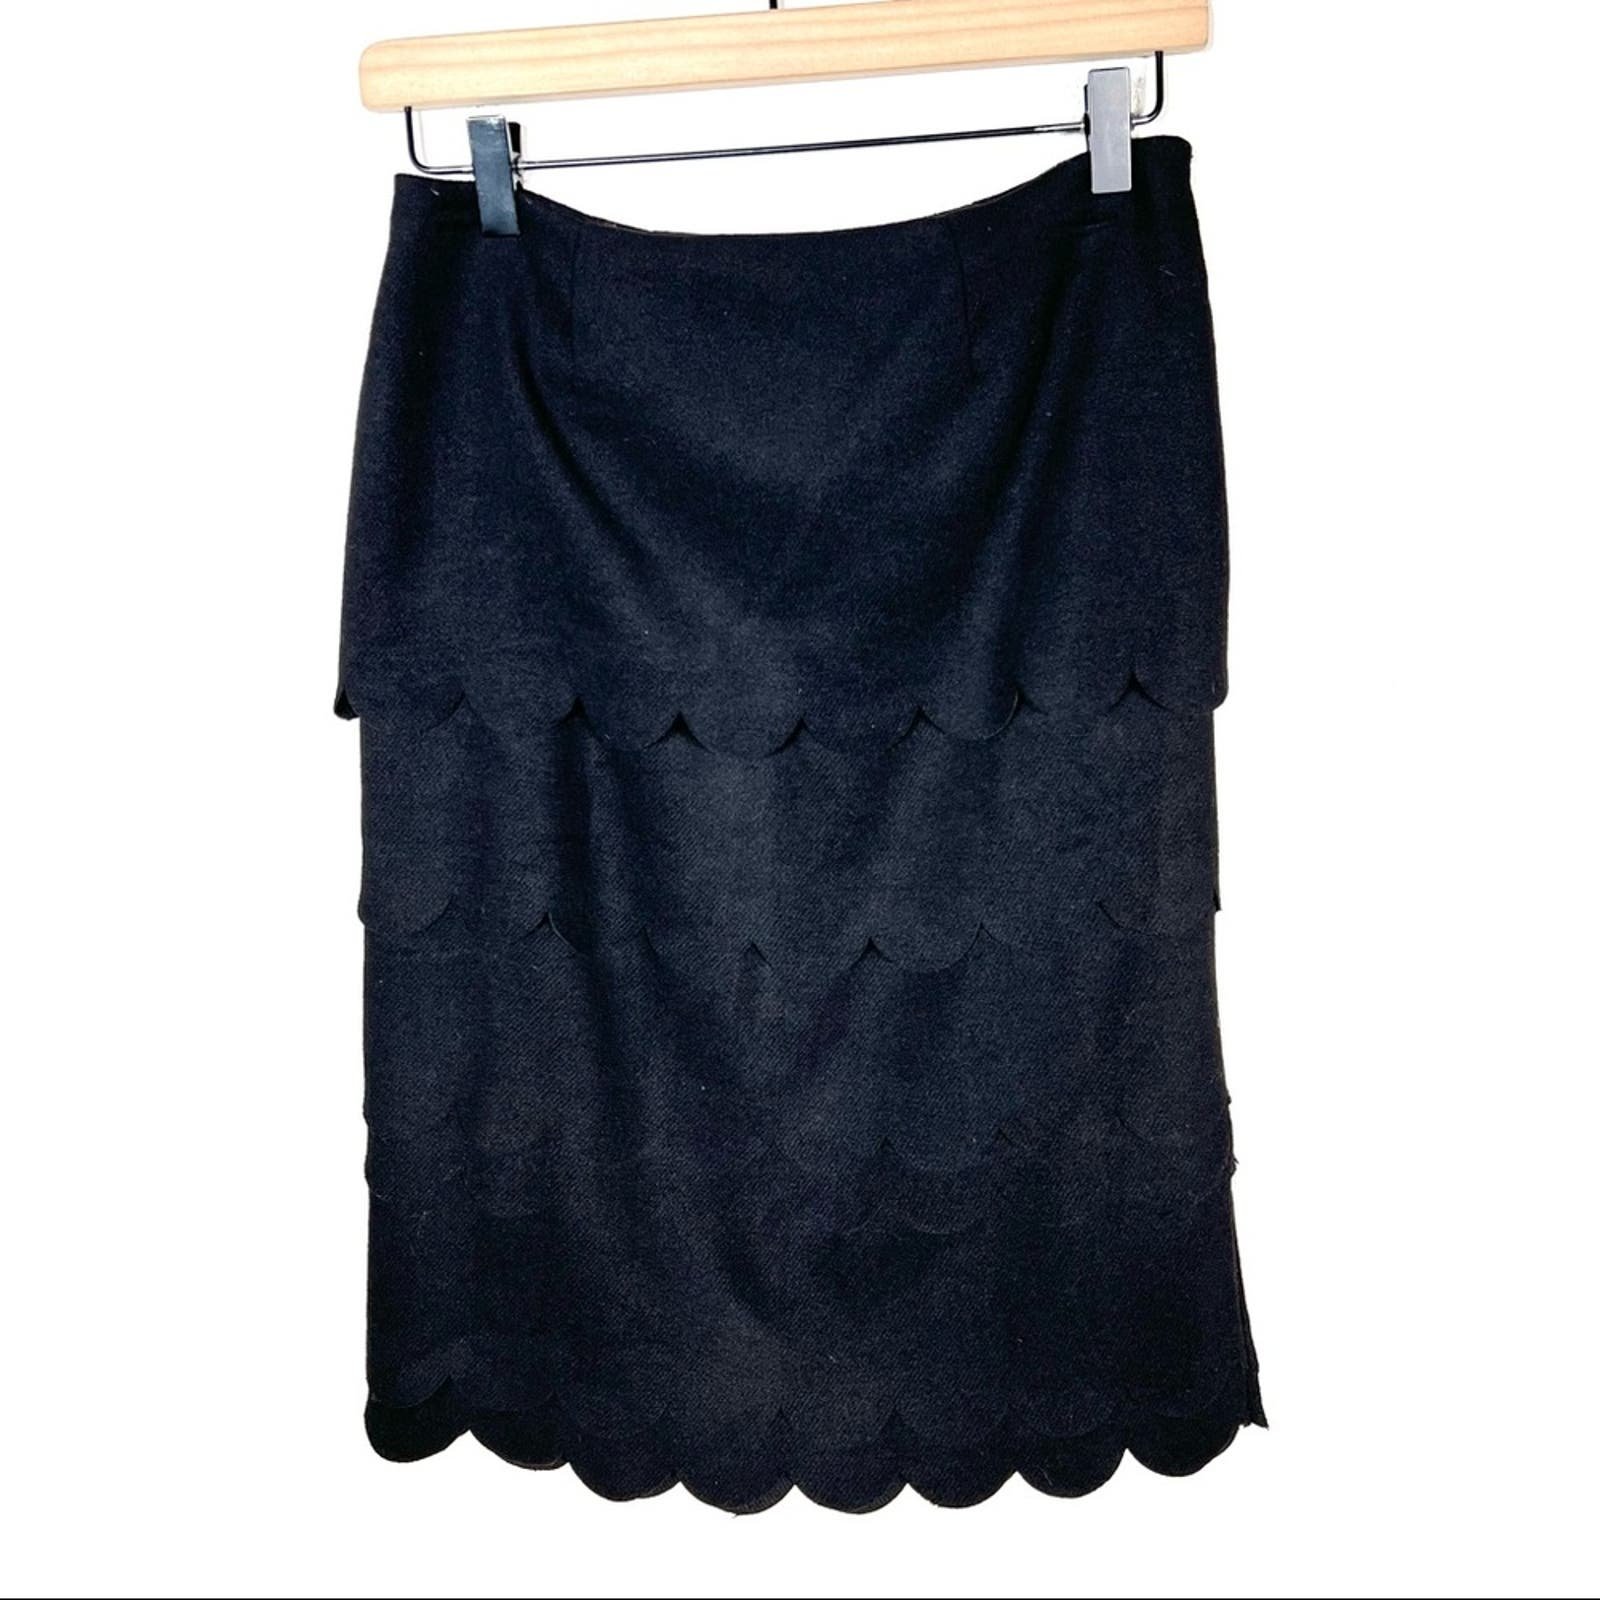 where to buy  Anthropologie Maeve black tiered straight pencil business casual skirt sz 0 B51 NZYjC0sKc Low Price